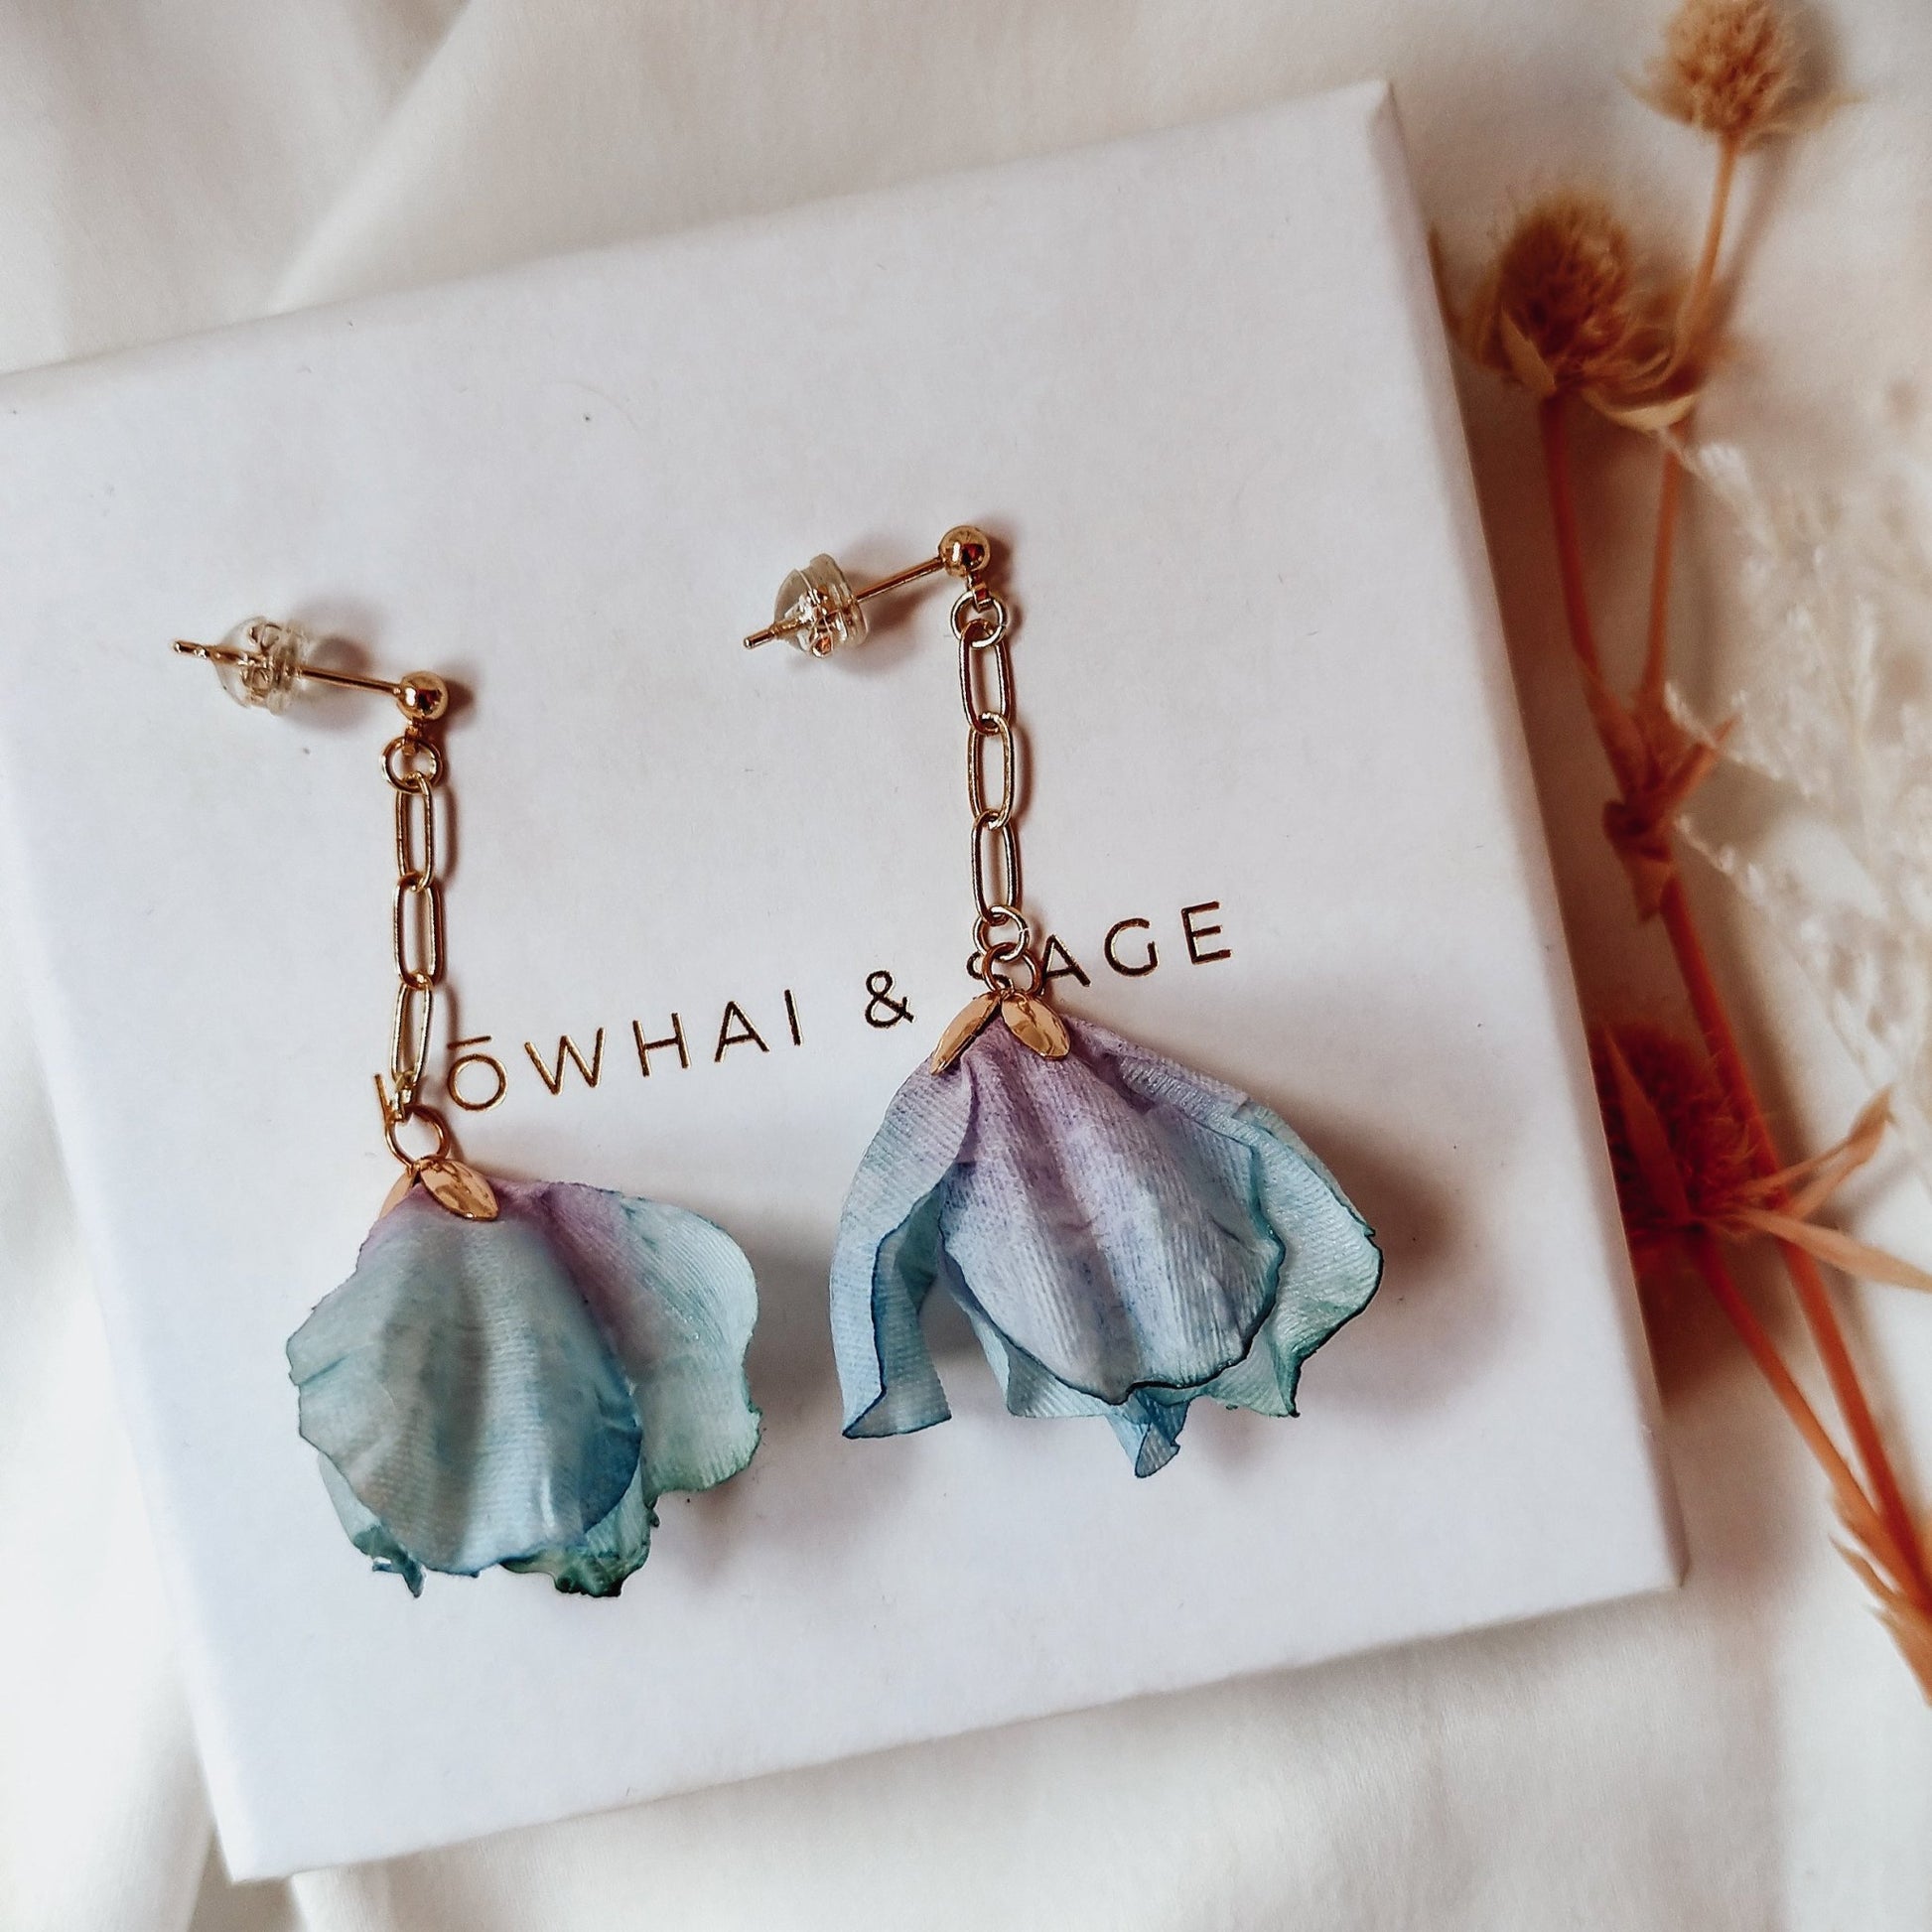 Floral Earrings - Kowhai and Sage